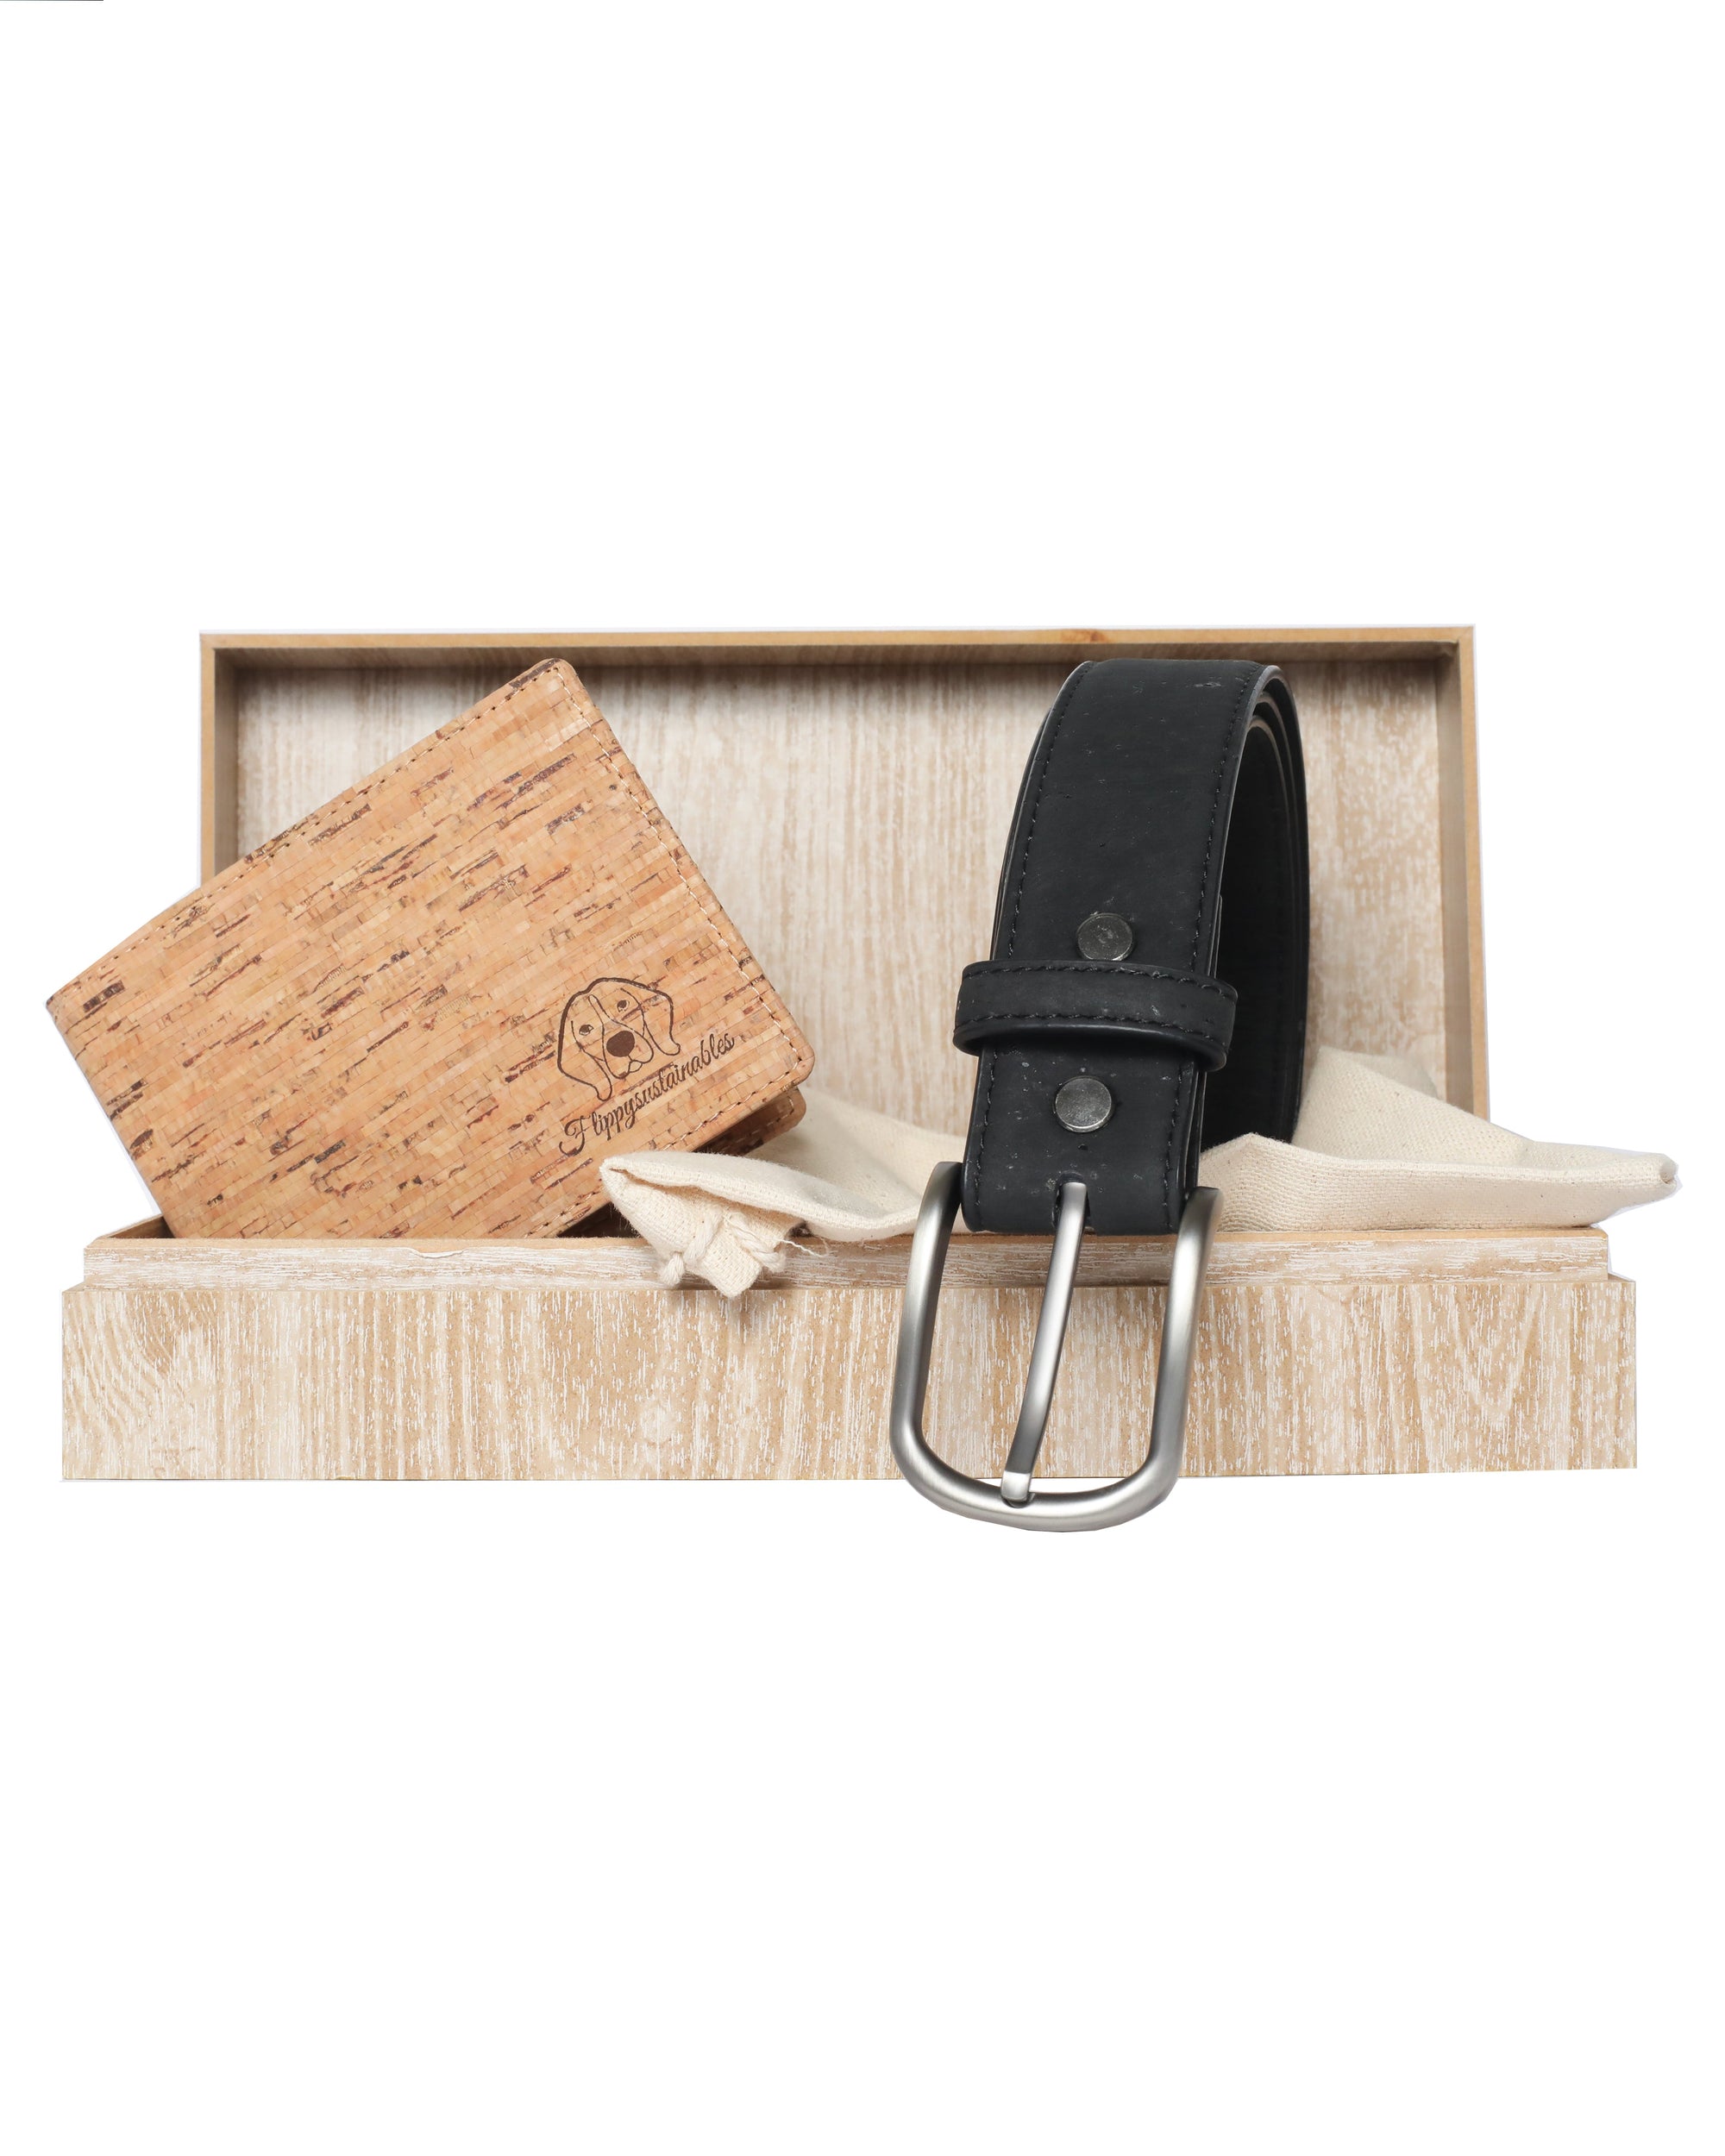 gift hamper for him: premium vegan leather black dune belt and beige ravine wallet | customized combo surprise gift box by flippysustainables | fit for corporate gifting for clients and colleagues 			